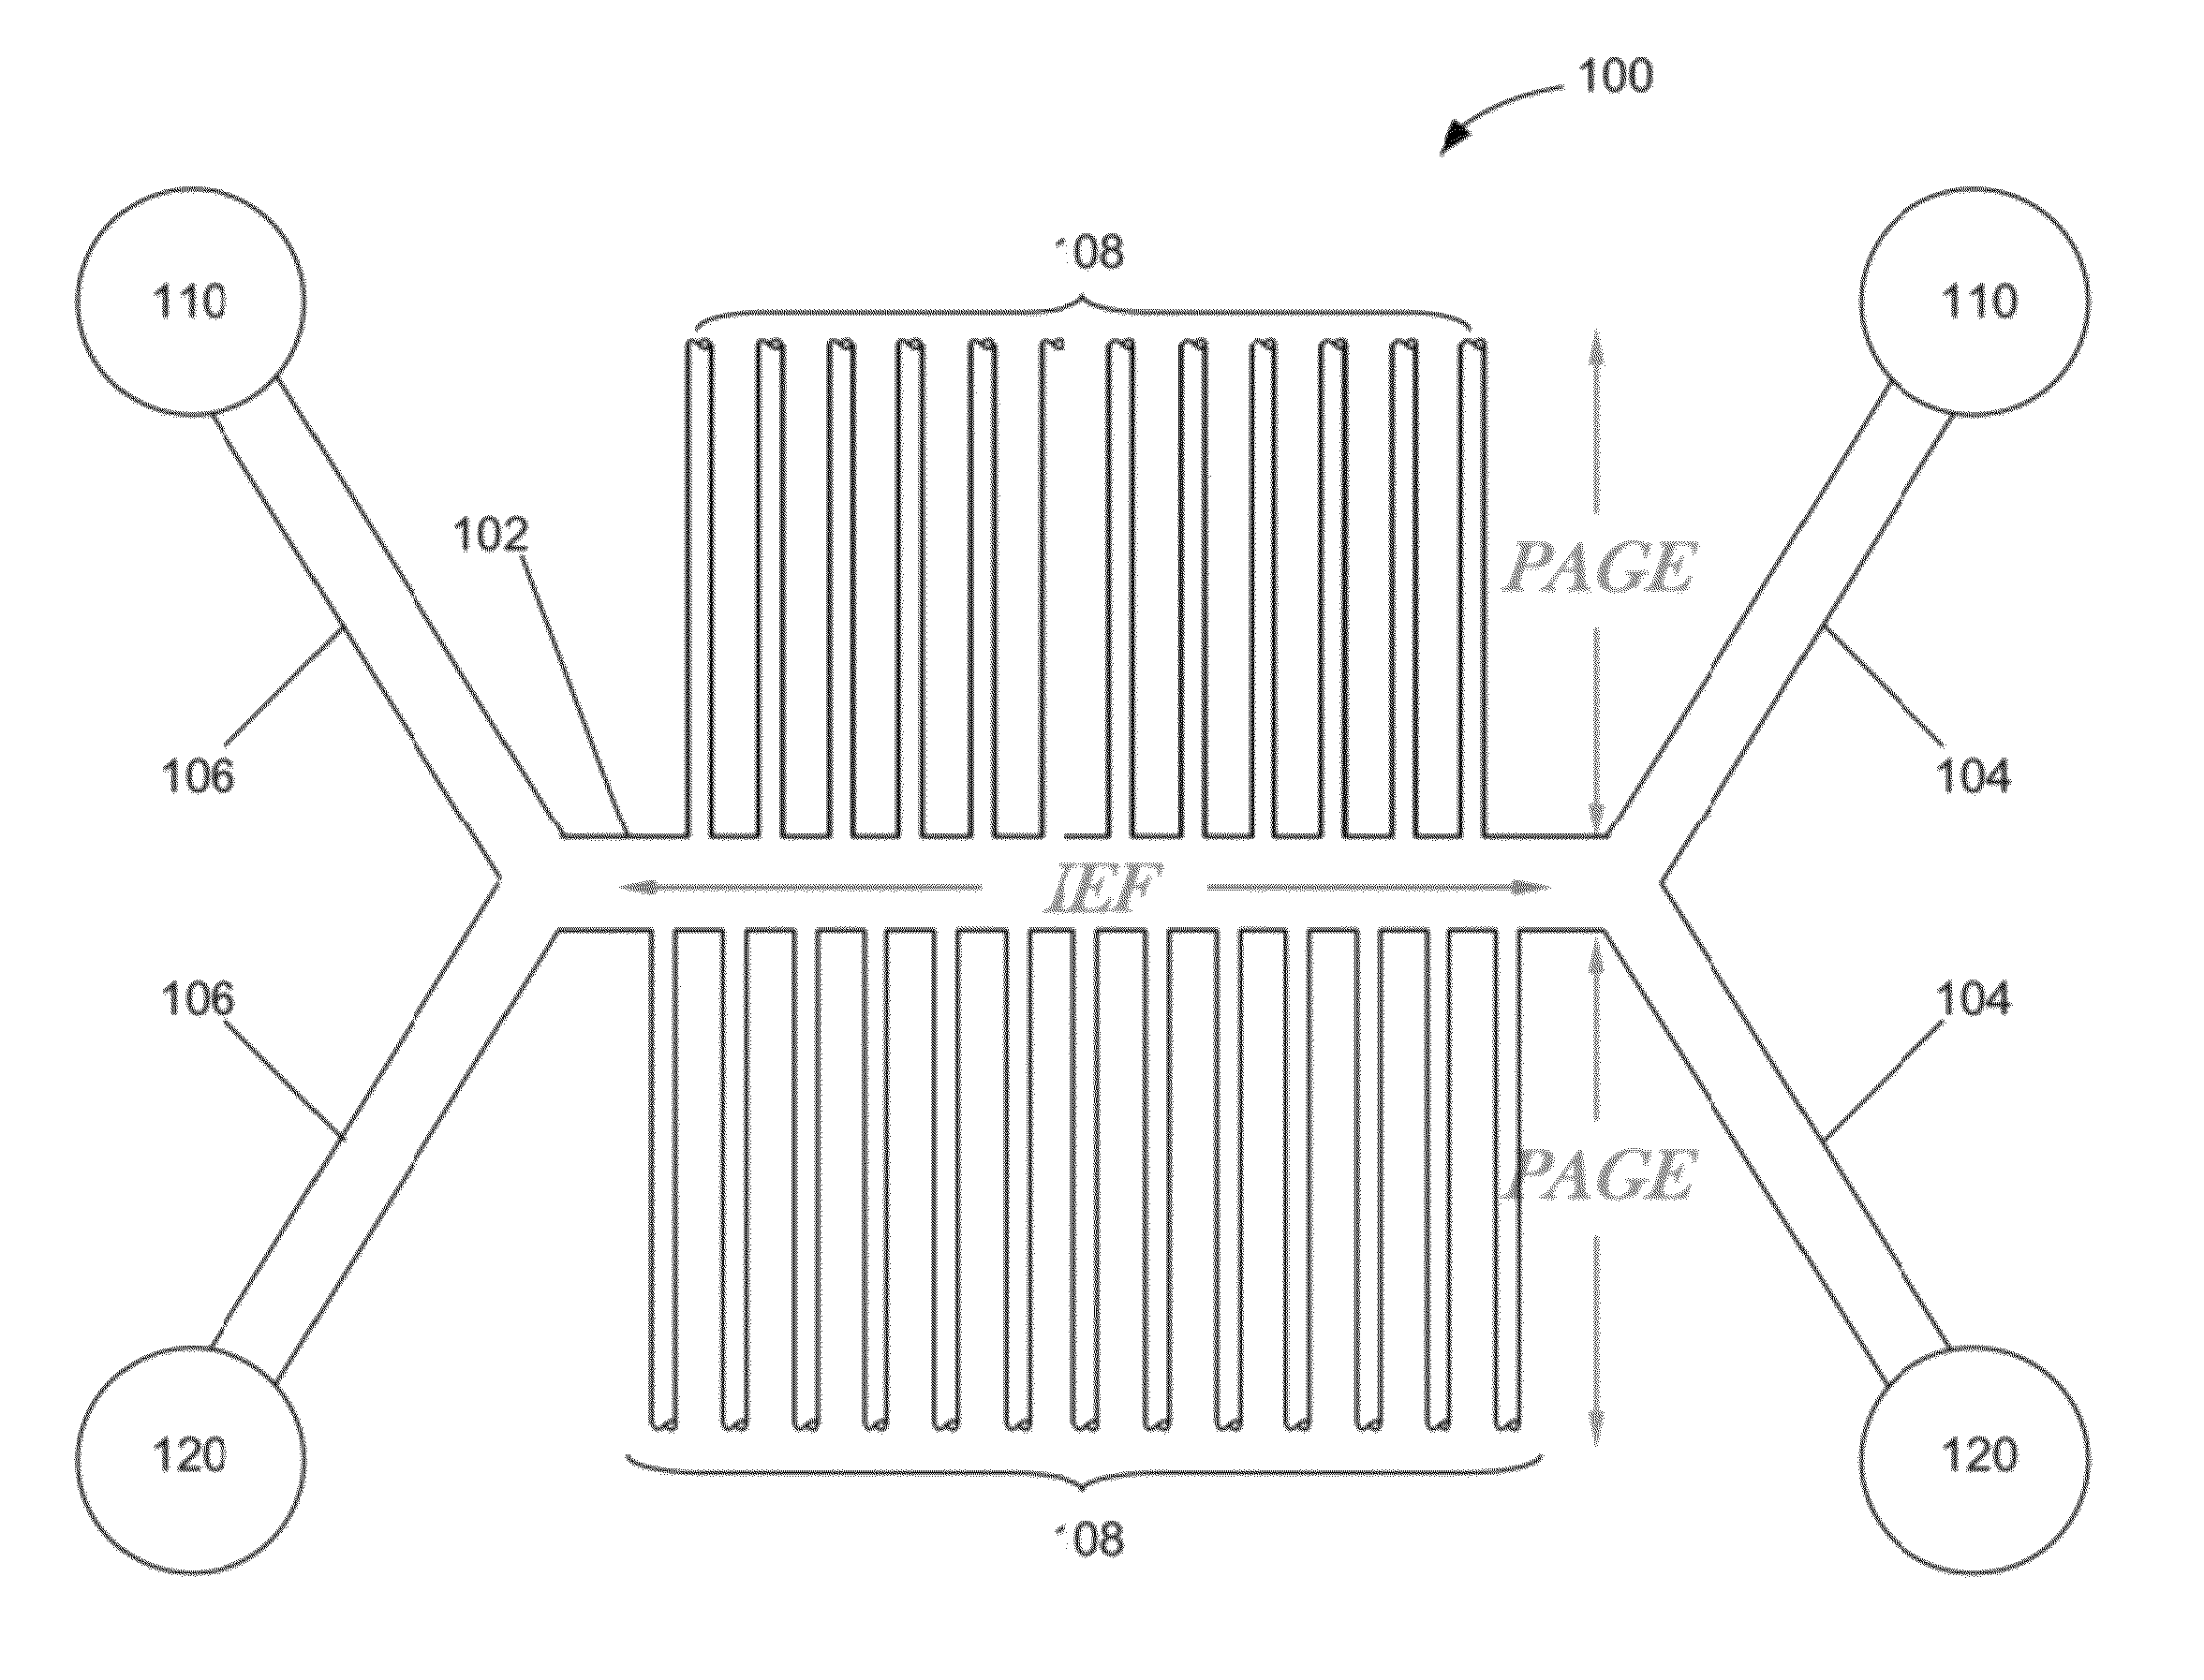 Microfluidic device having an immobilized pH gradient and PAGE gels for protein separation and analysis